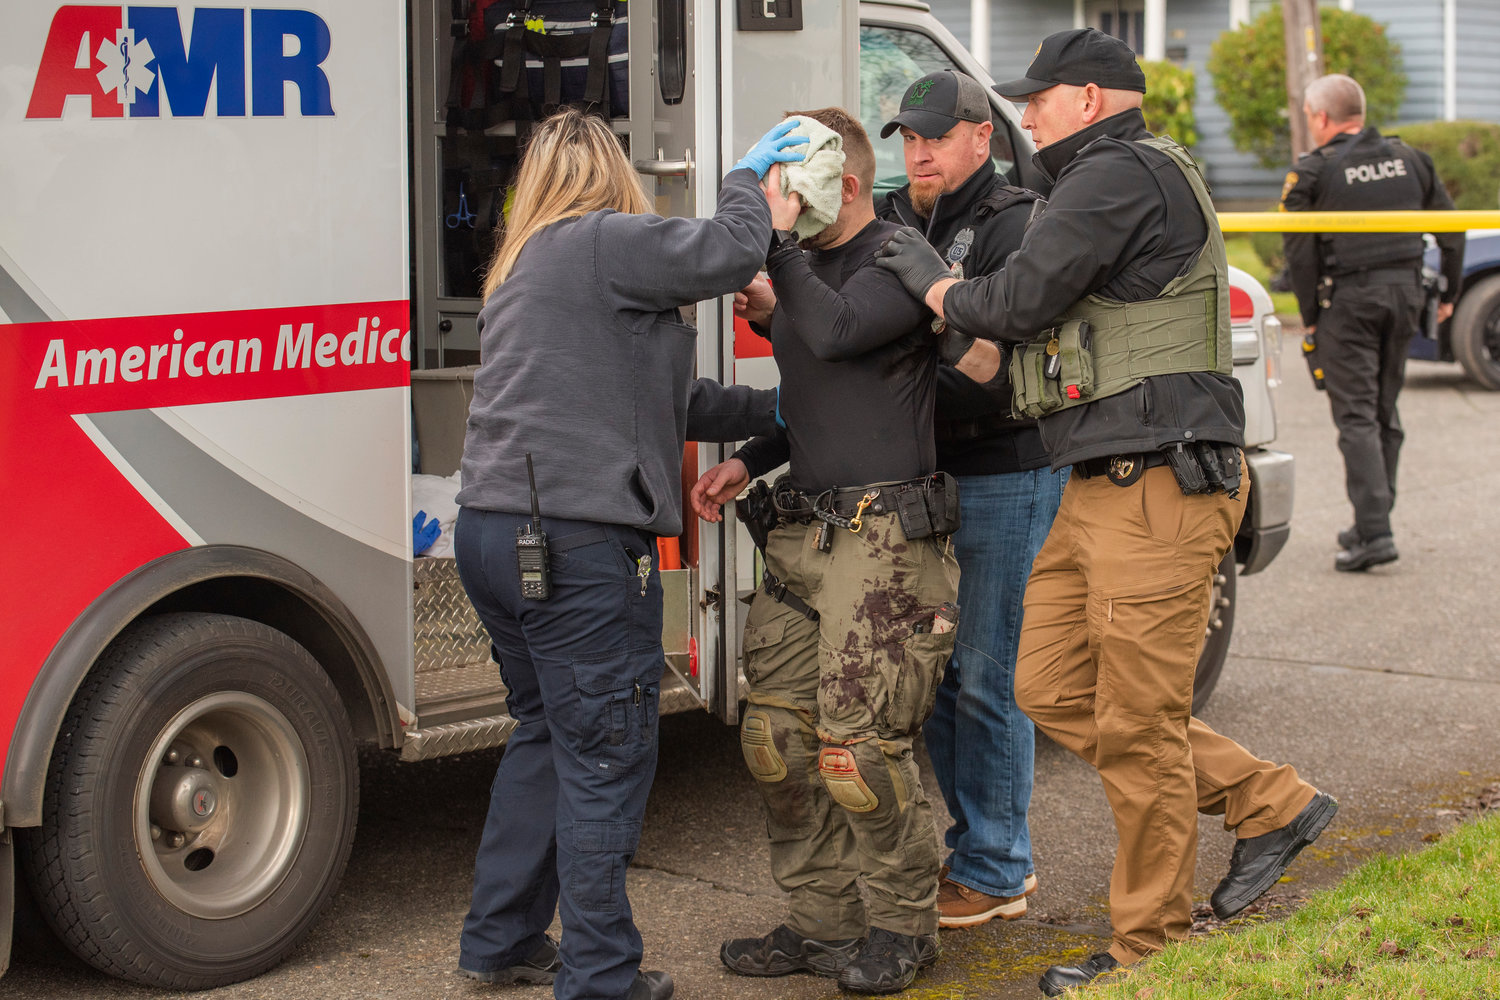 Officer Stephen Summers is treated for injuries and helped into the back of an ambulance in the 100 block of Southwest Alfred Street in Chehalis.